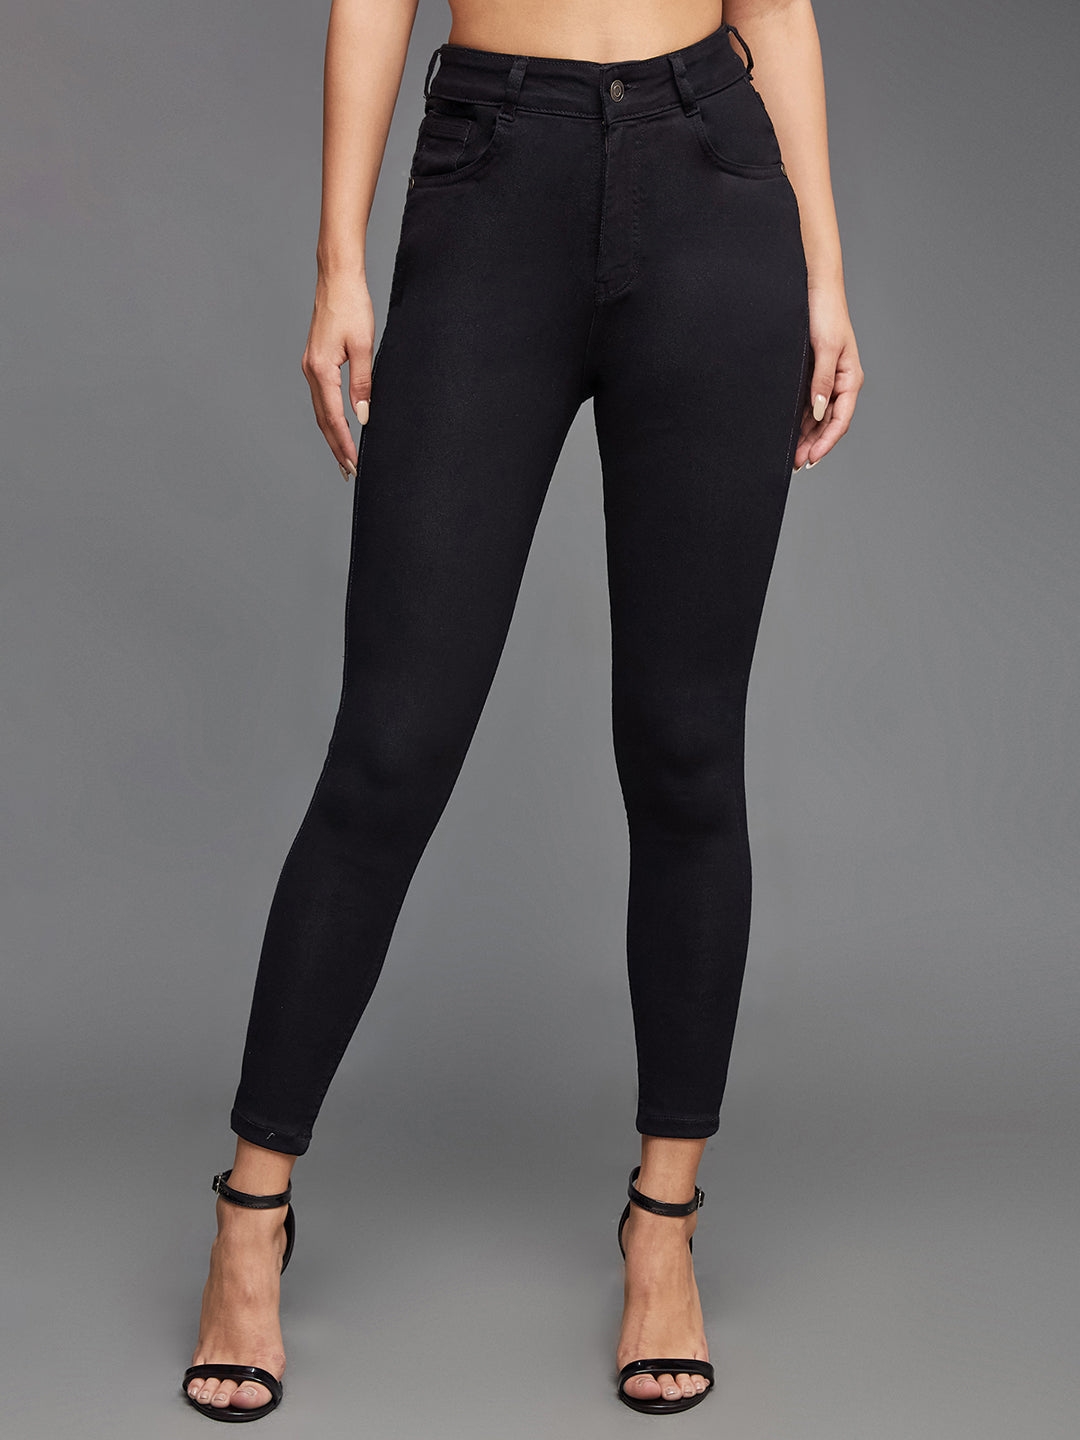 MISS CHASE | Black Skinny Fit High Rise Clean Look Cropped Length Stretchable Denim Jeans